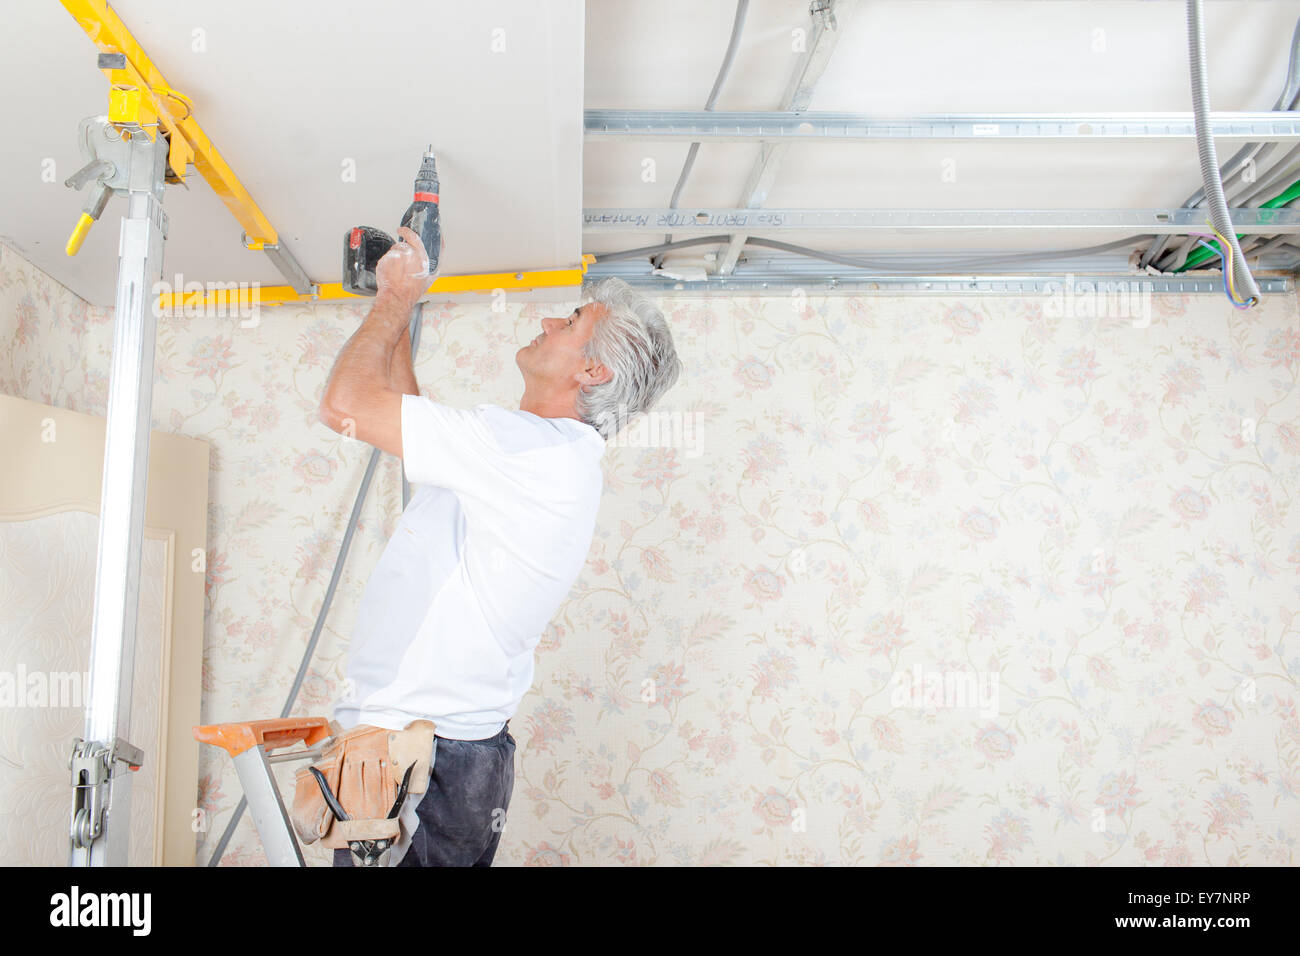 Handyman drilling into the ceiling Stock Photo